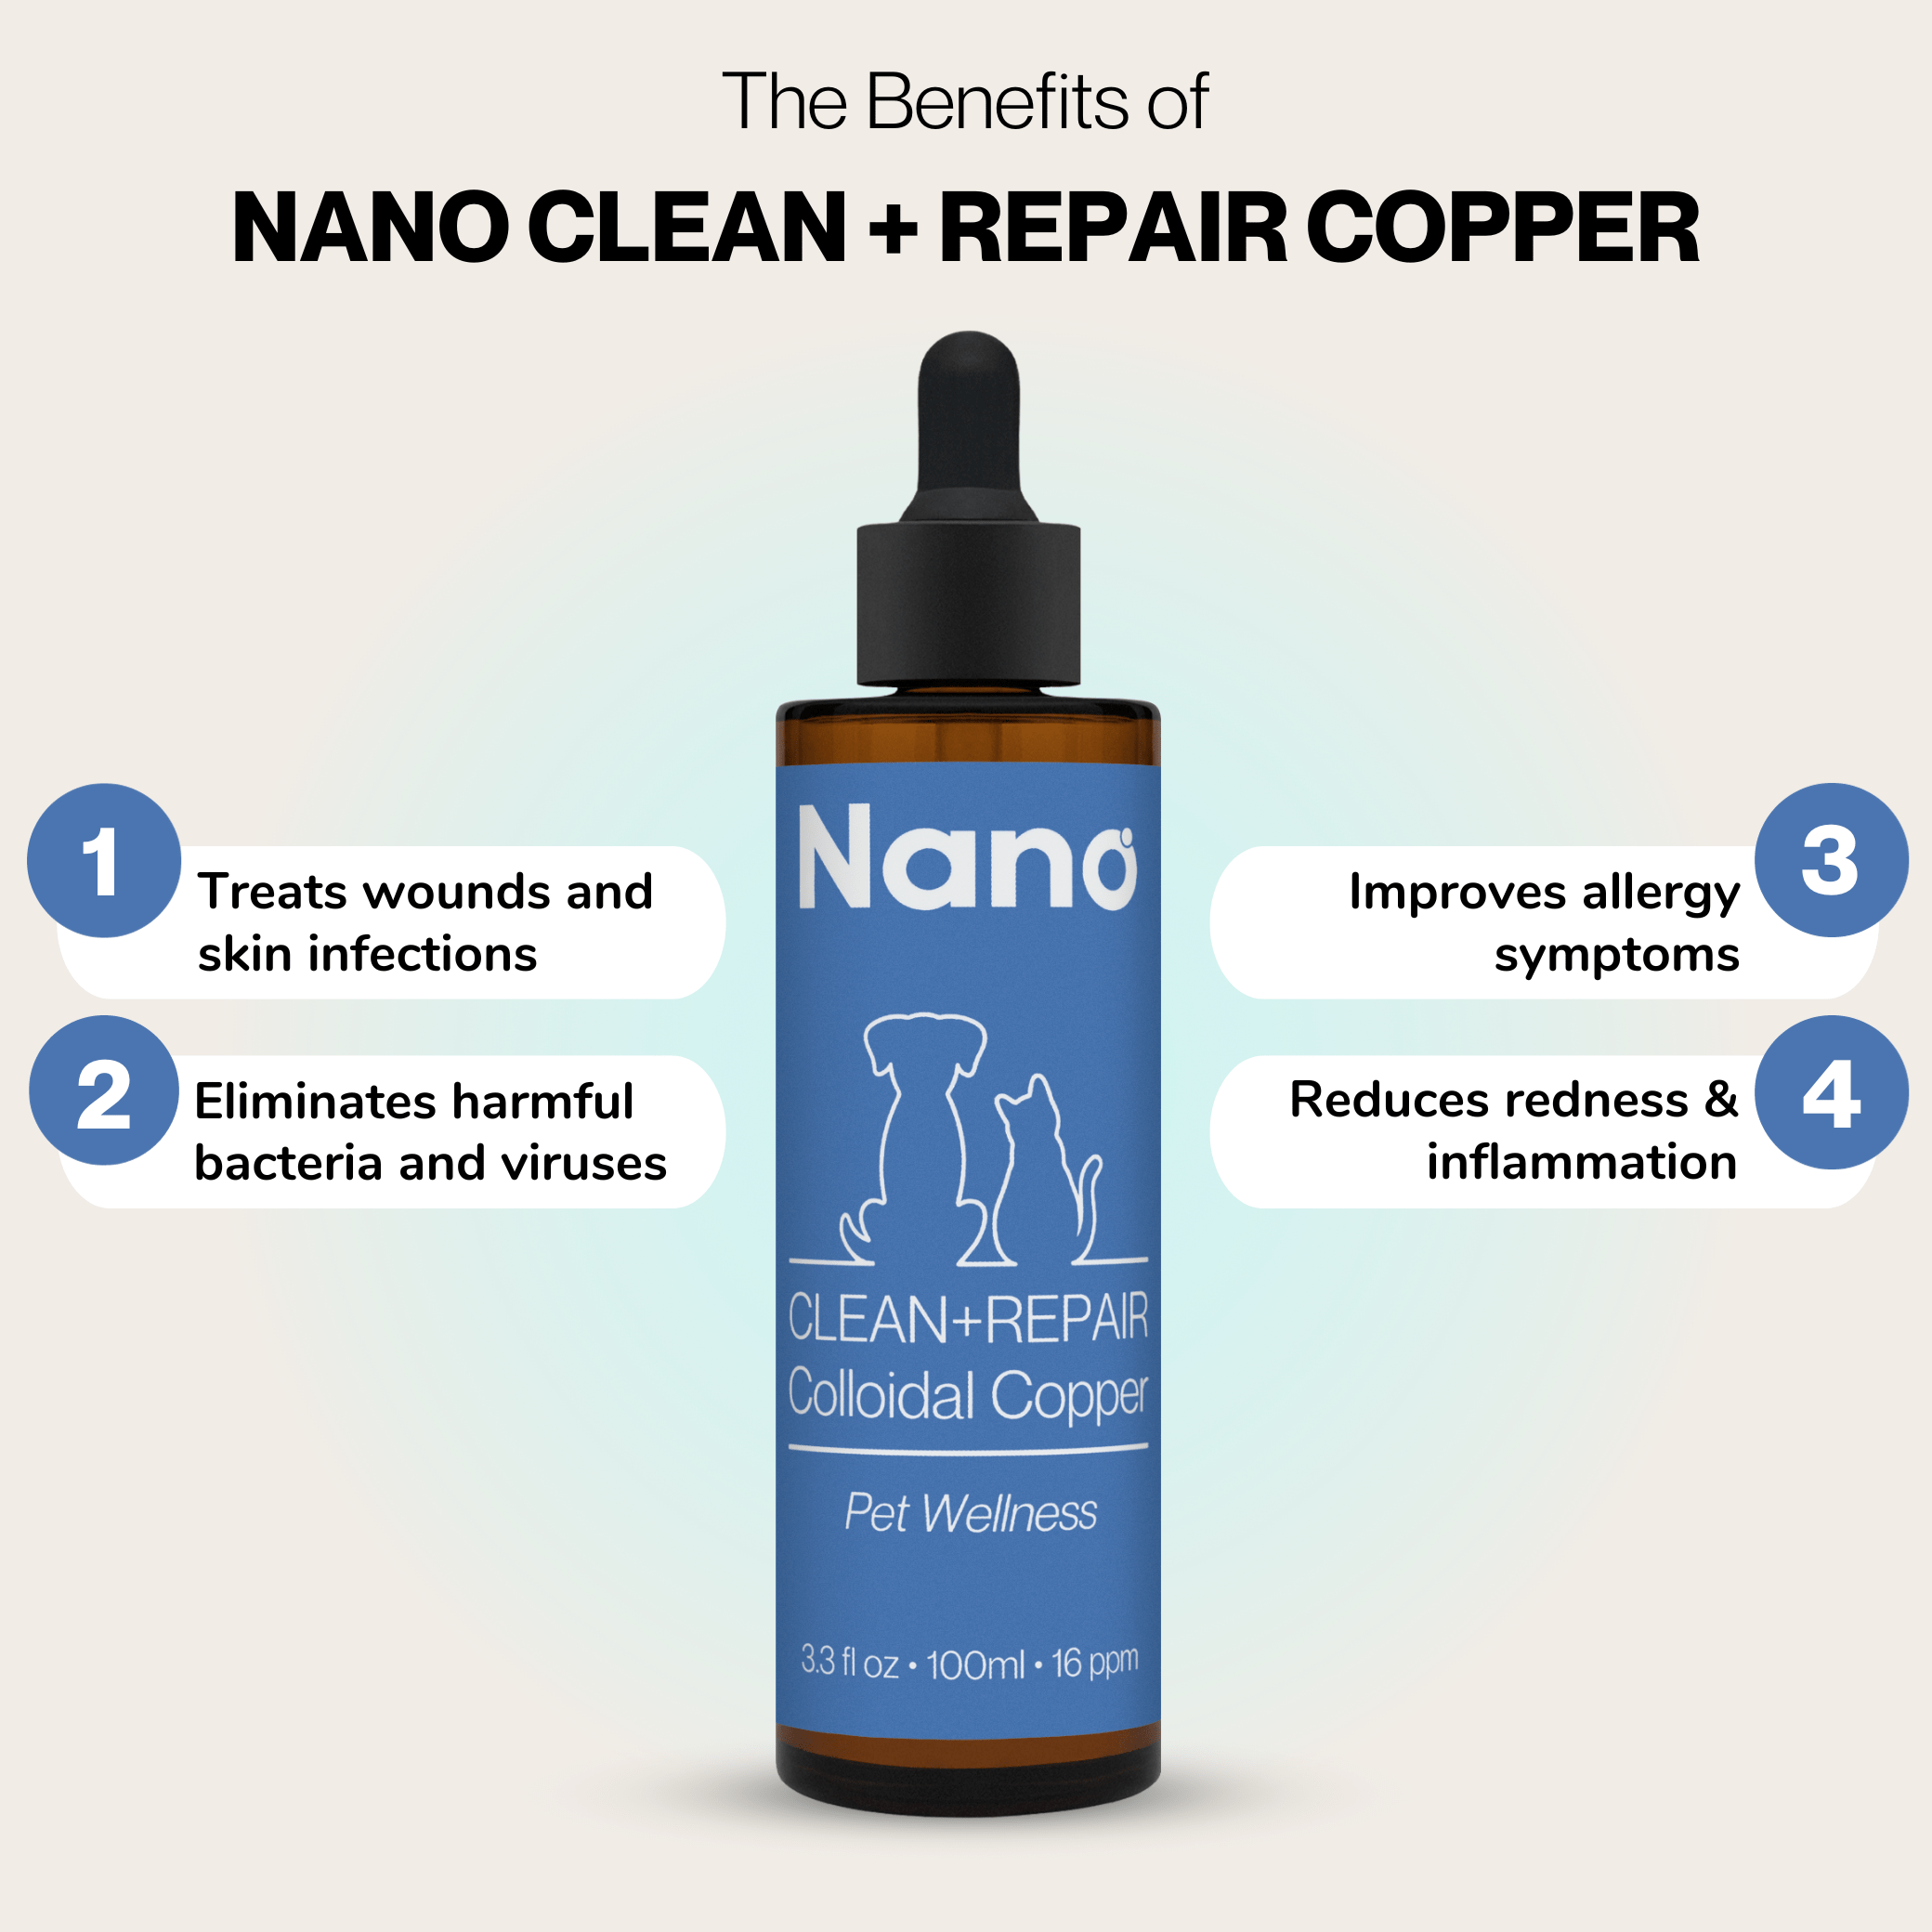 The benefits of Nano clean and repair colloidal copper pet wellness supplement. Treats wounds and skin infections. Eliminates harmful bacteria and viruses. Improves allergy symptoms. Reduces redness and inflammation